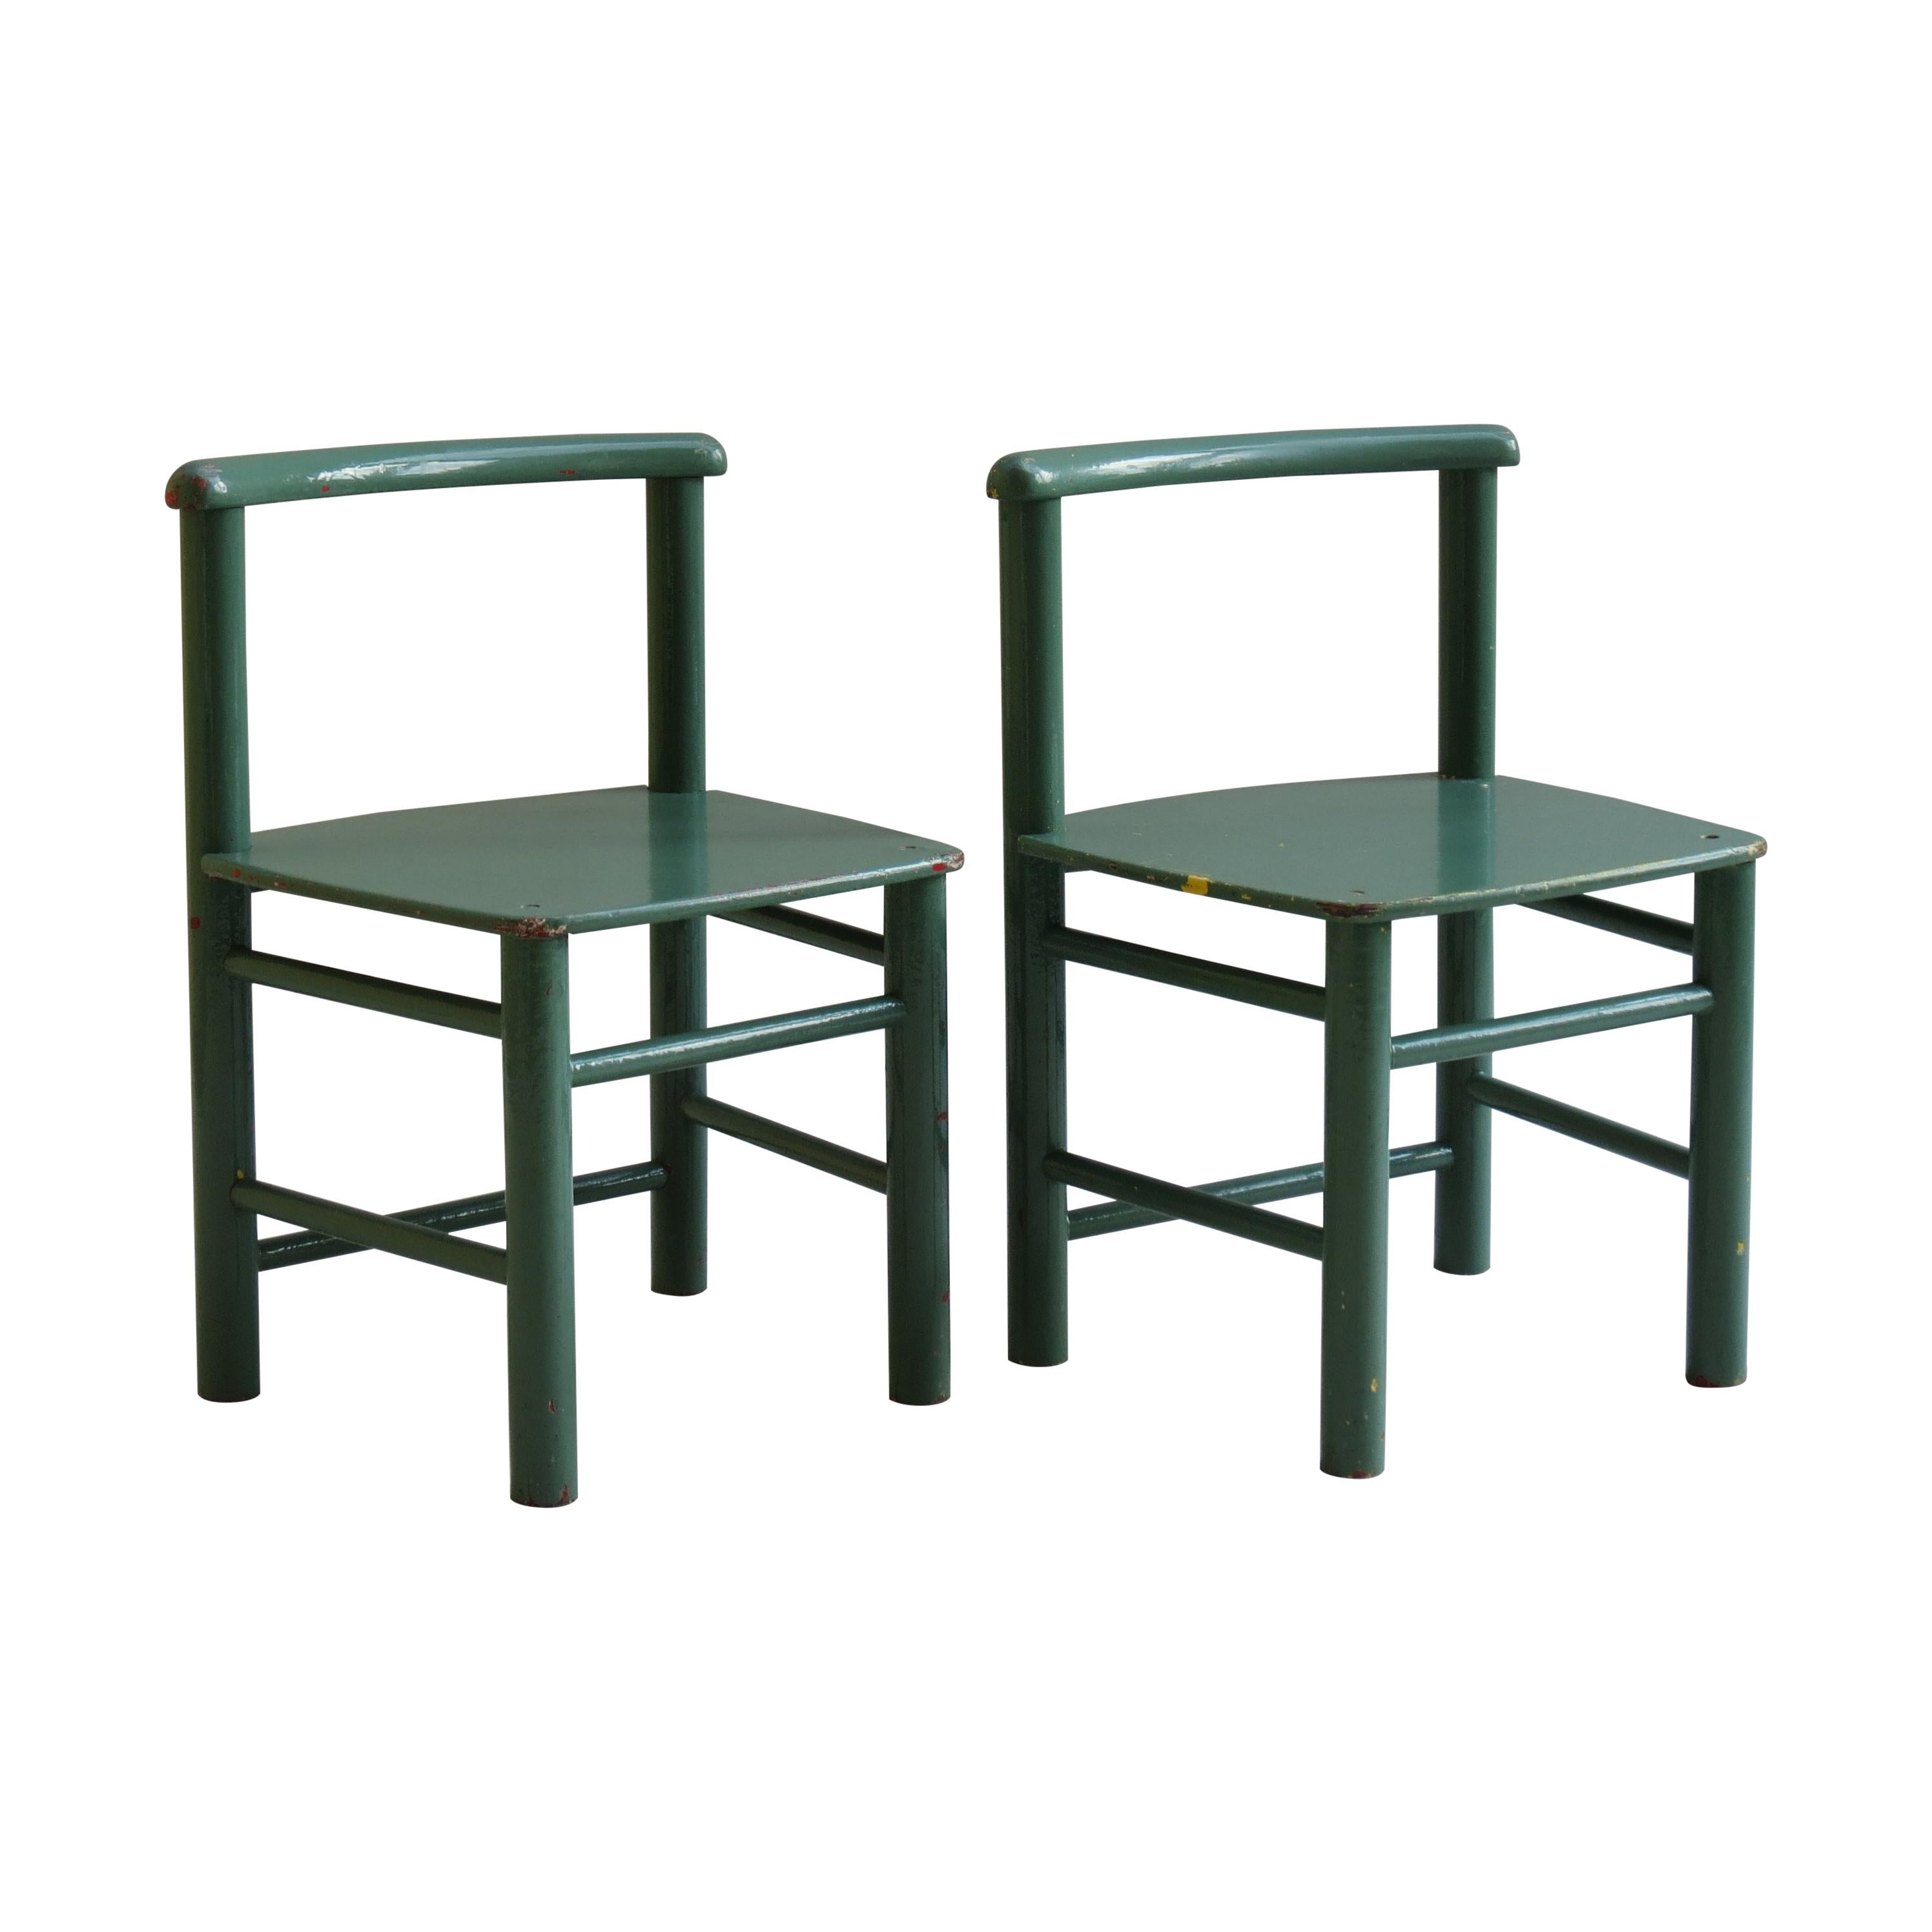 Pair of Scandinavian Childs Chairs in Green from the 1960s